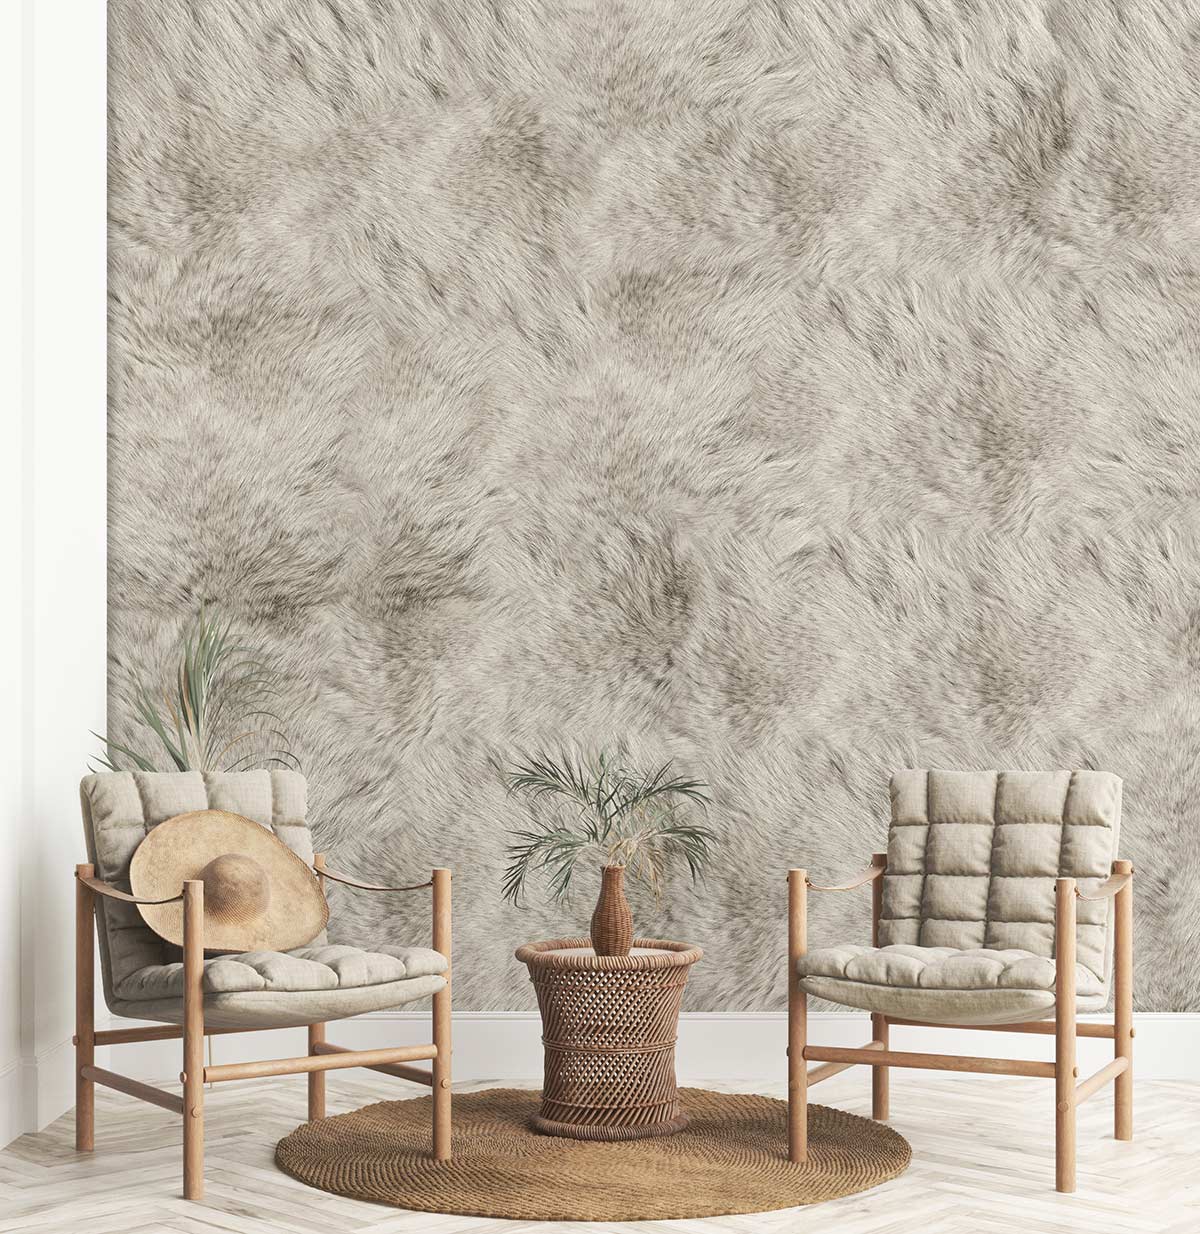 a mural wallpaper design for the restrooms that features a muted, fuzzy texture.